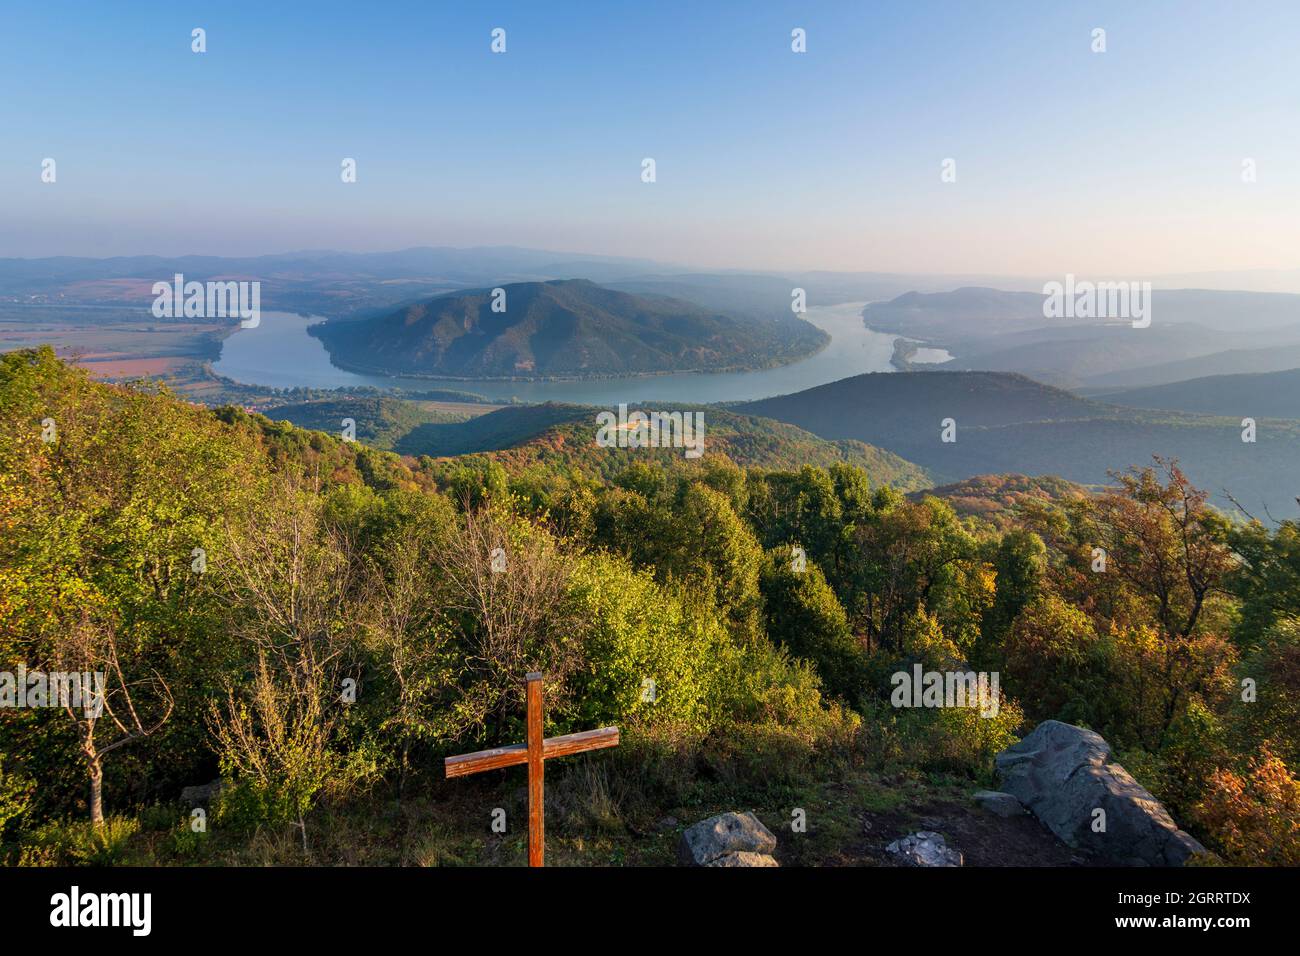 Visegrad Mountains: bend of Danube River, view to Börzsöny Mountains, view from summit Predikaloszek (Predigerstuhl, Preaching chair) in Danube-Ipoly Stock Photo